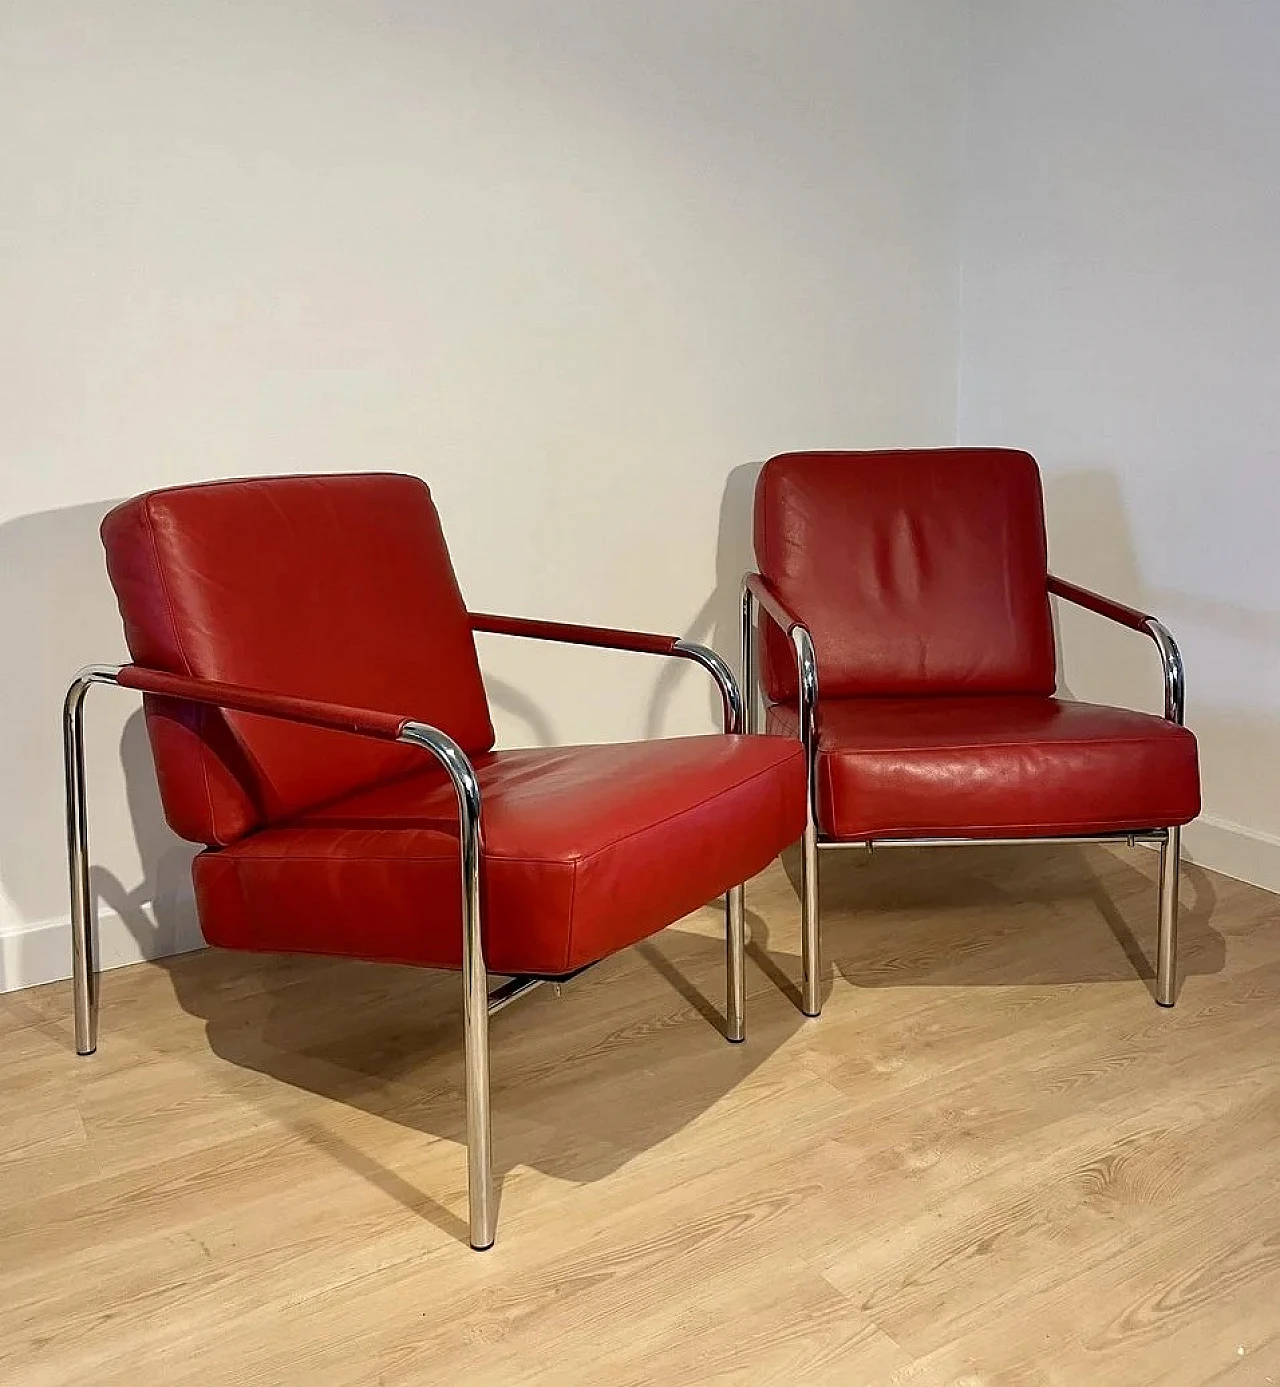 Pair of Susanna armchairs by Gabriele Mucchi for Zanotta 2